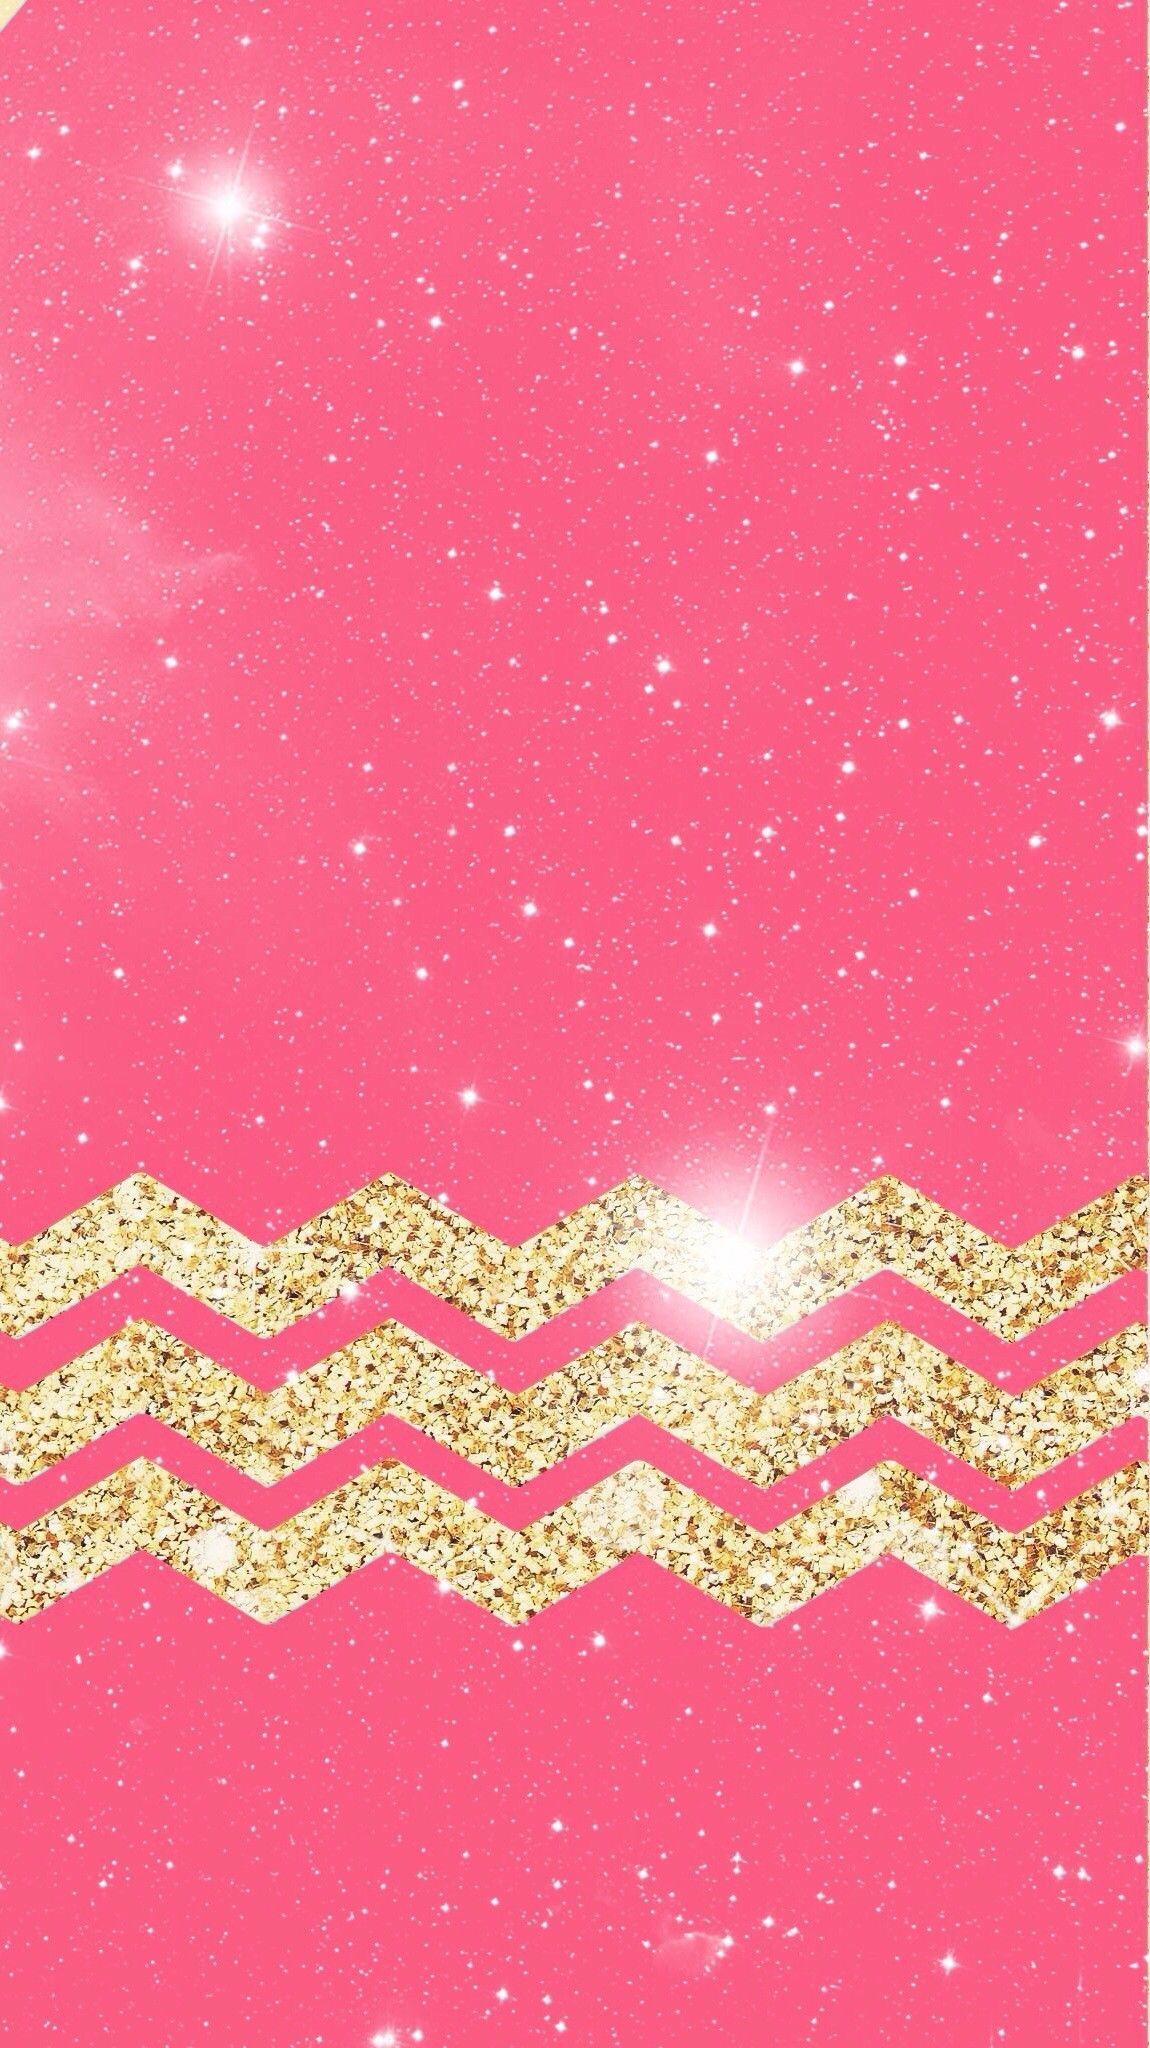 Pink and Gold backgroundDownload free cool background